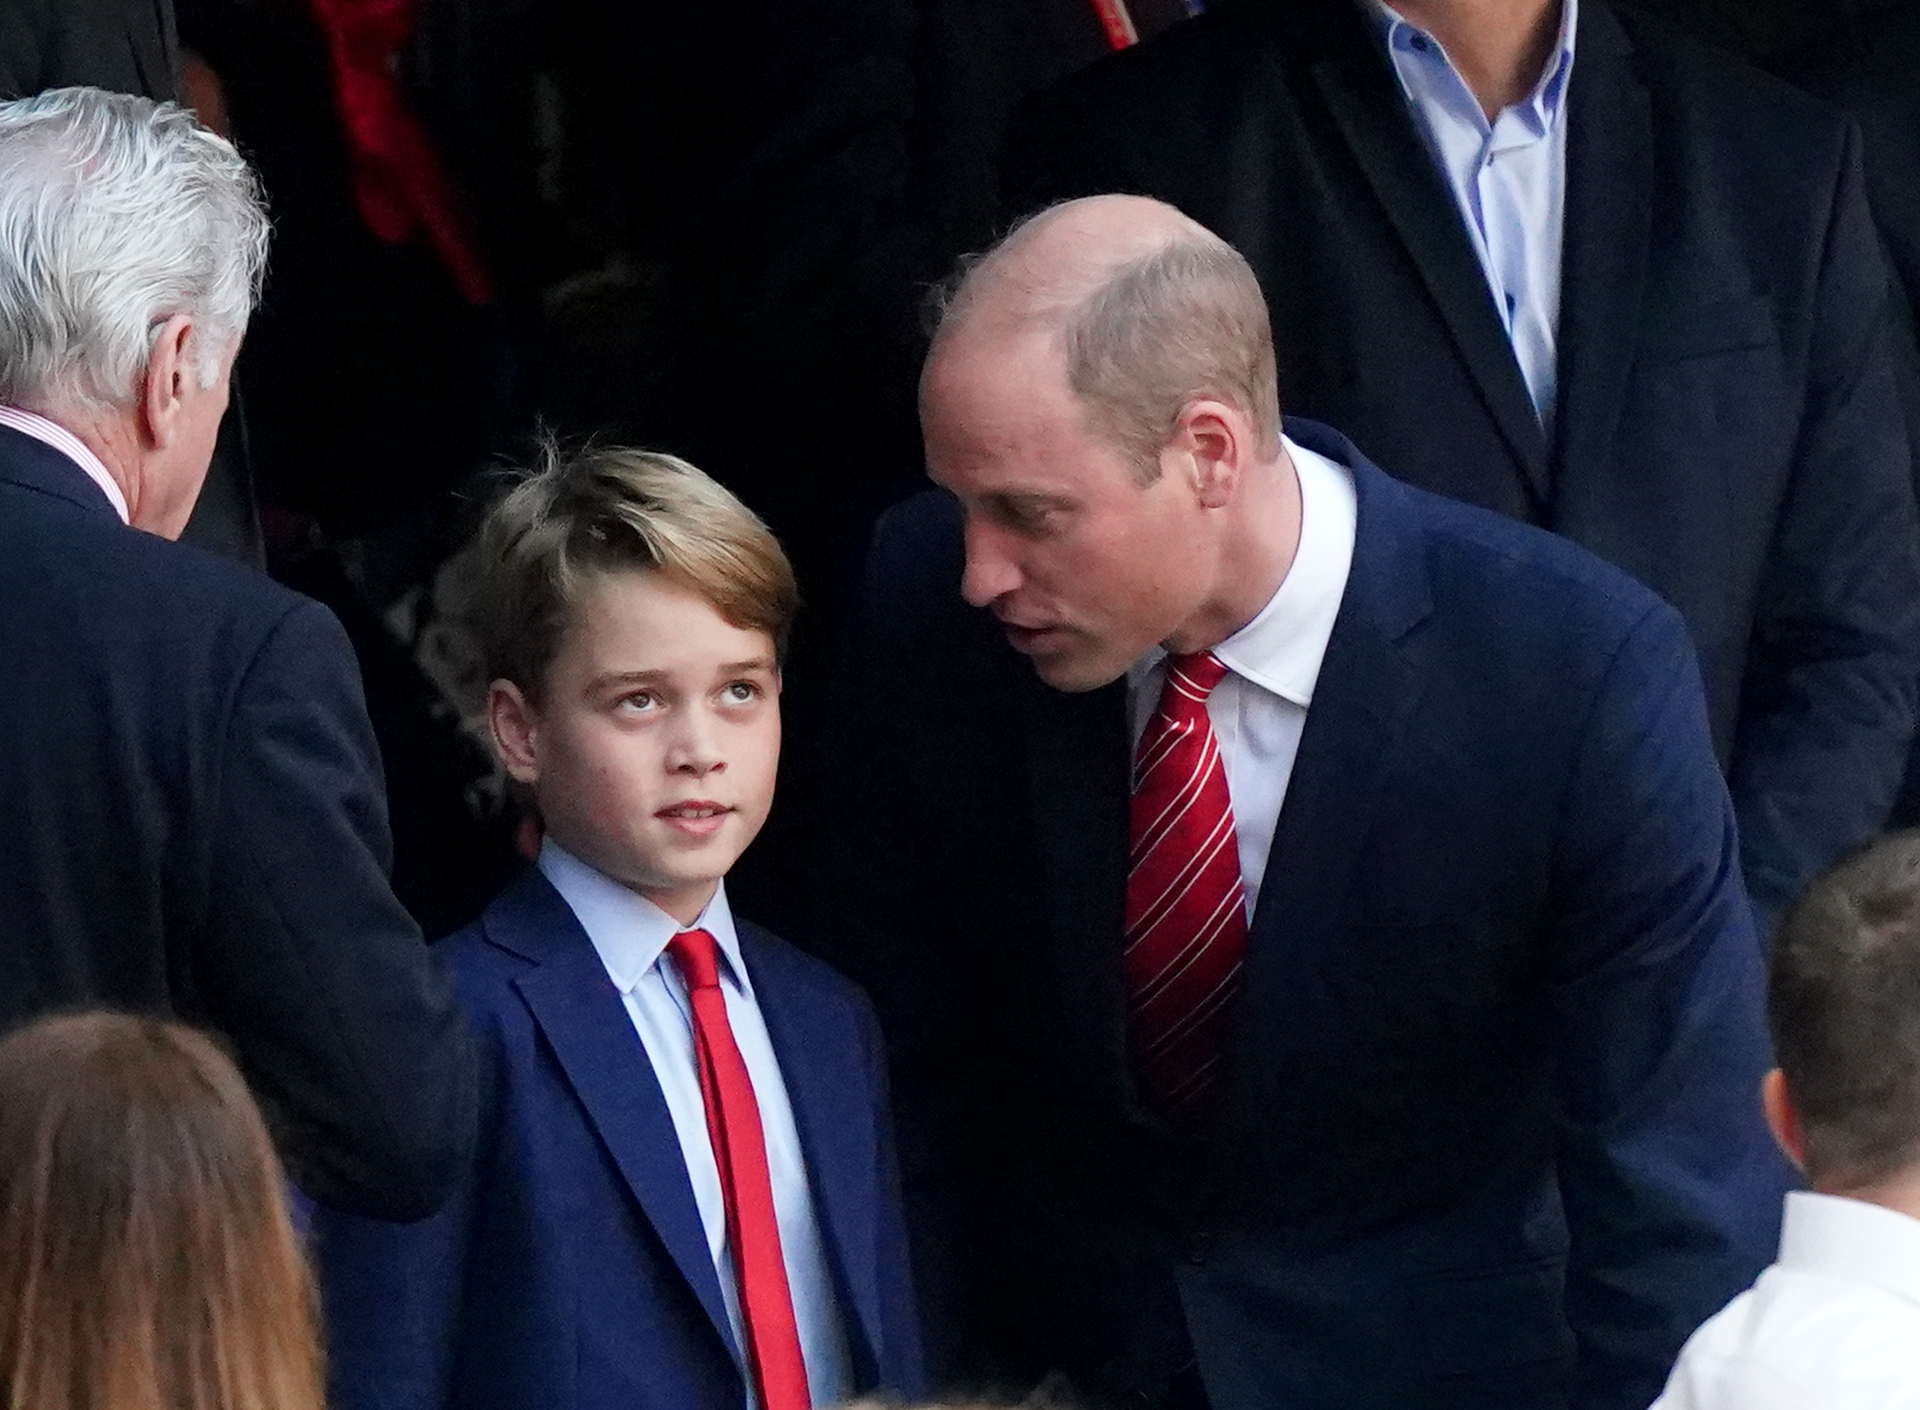 <p><span>Prince George half-tuned out his dad, <a href="https://www.wonderwall.com/celebrity/profiles/overview/prince-william-482.article">Prince William</a>, as they arrived in the stands to watch a match in the Rugby World Cup 2023 quarter final match at Stade Velodrome in Marseille, France, on Oct. 14, 2023.</span></p><p>The future kings -- wearing matching navy suits and red ties -- made the trip to France to support Wales in the quarterfinals as the team played Argentina. William is patron of the Welsh Rugby Union.</p>